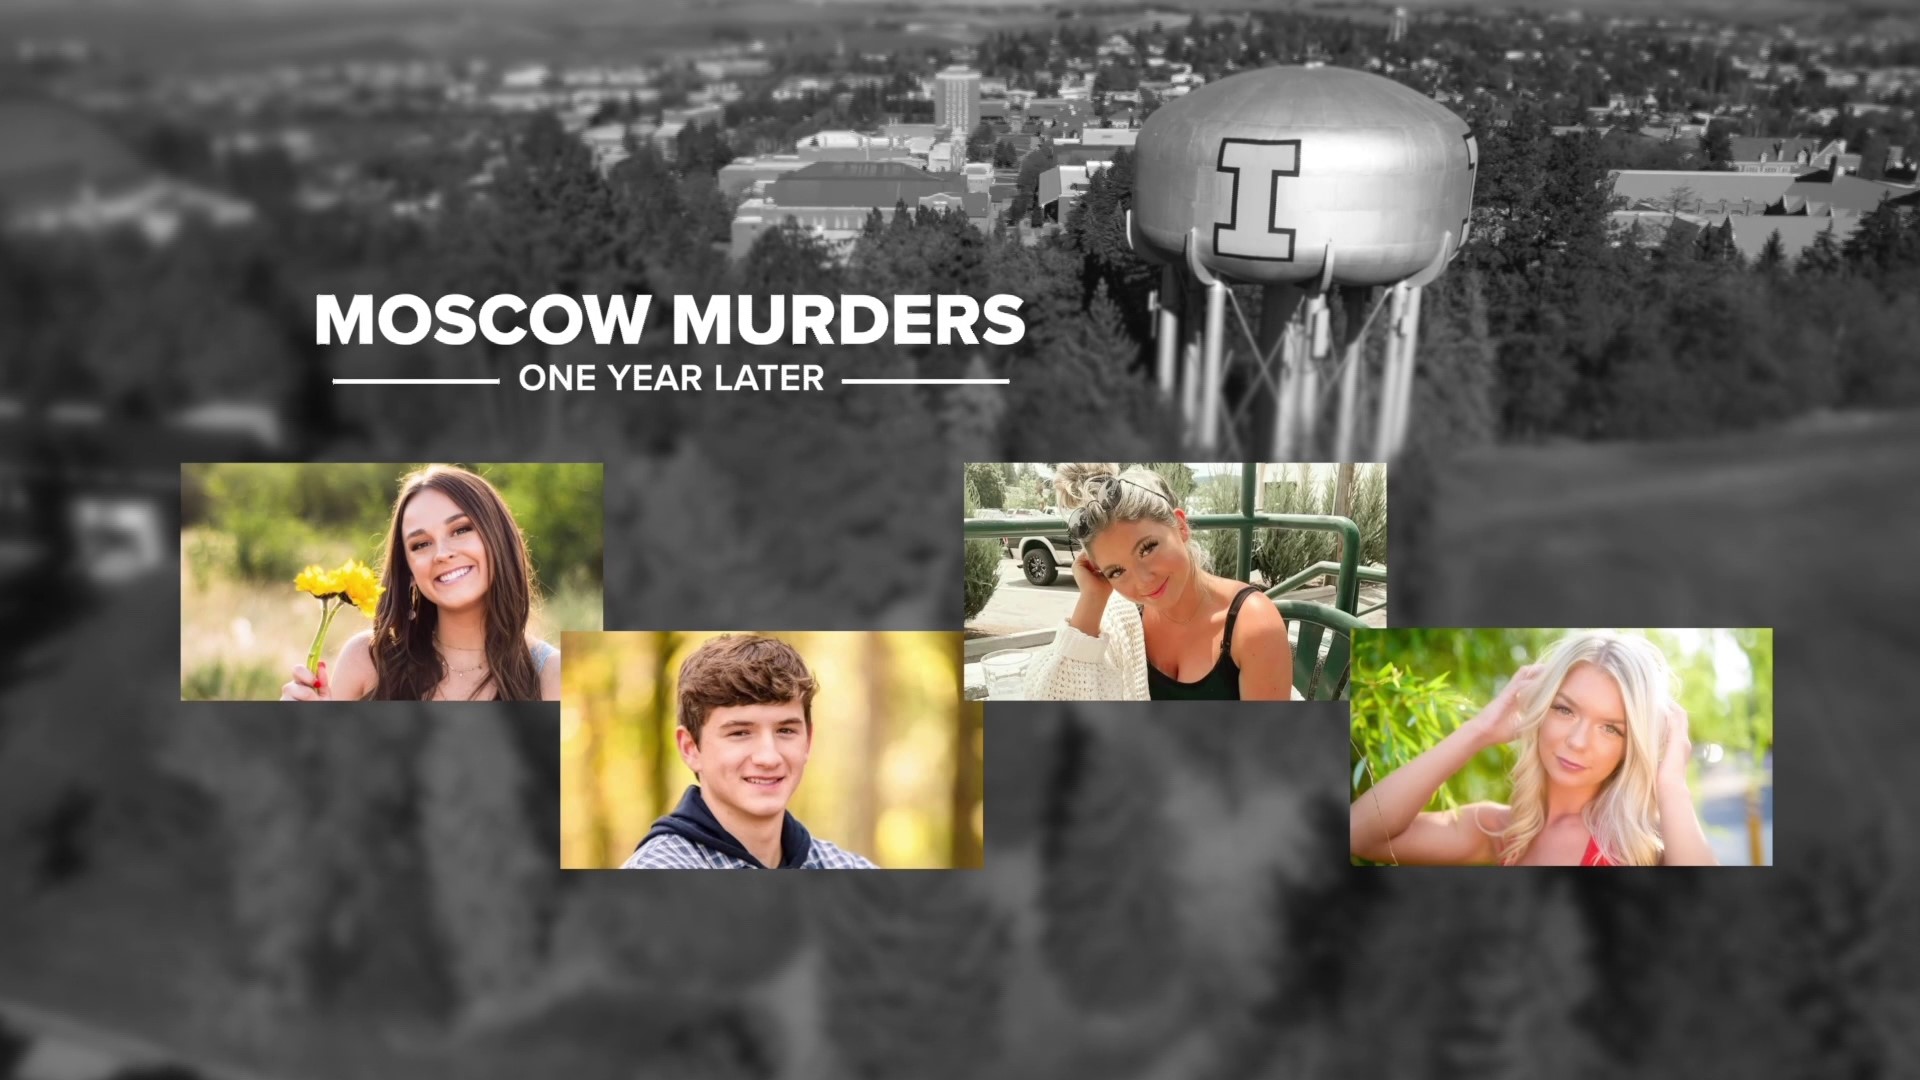 It's been one year since Ethan Chapin, Kaylee Goncalves, Xana Kernodle and Madison Mogen were killed. In that year, the community and nation have not forgotten them.